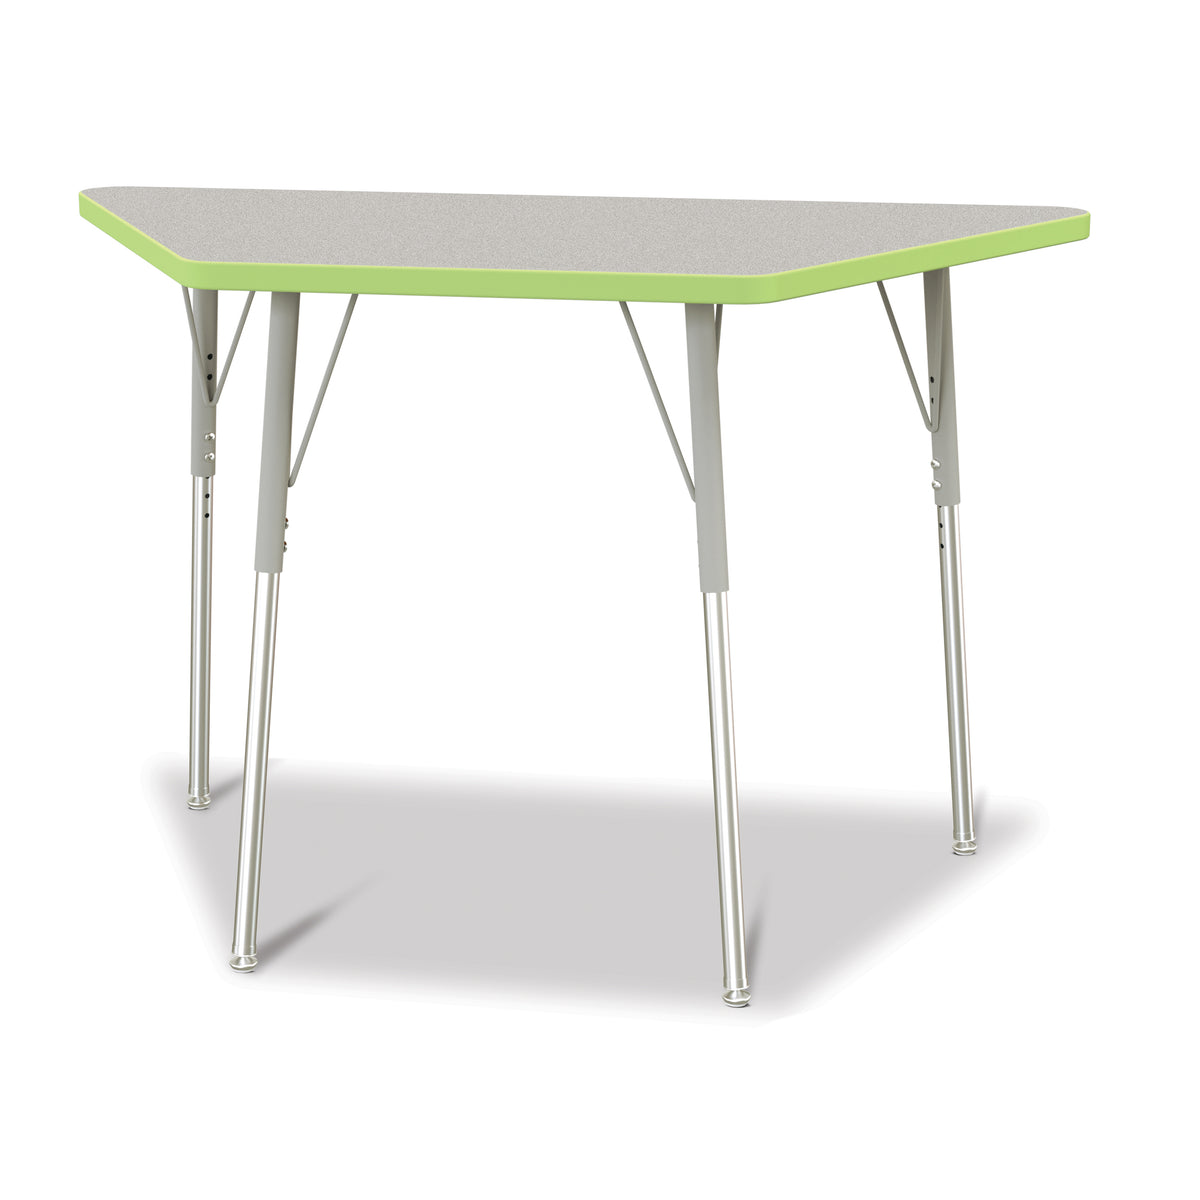 6438JCA130, Berries Trapezoid Activity Tables - 24" X 48", A-height - Freckled Gray/Key Lime/Gray